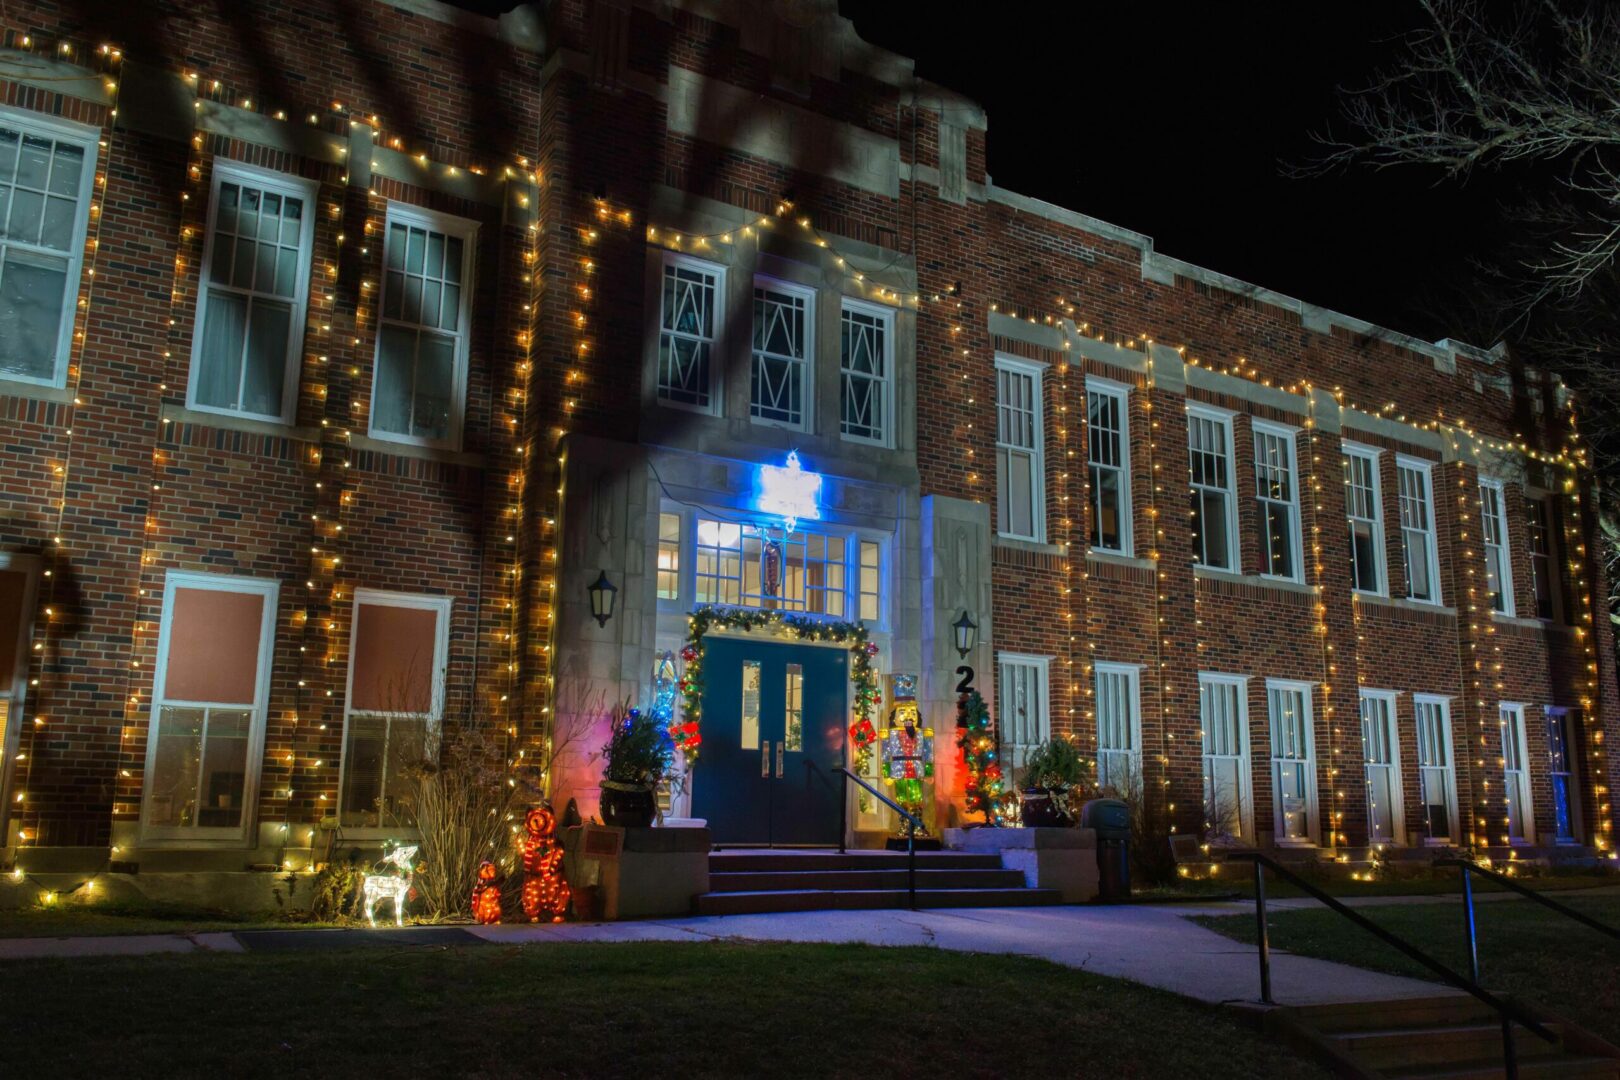 First Street Community Center building at night with seasonal decorative lights on display